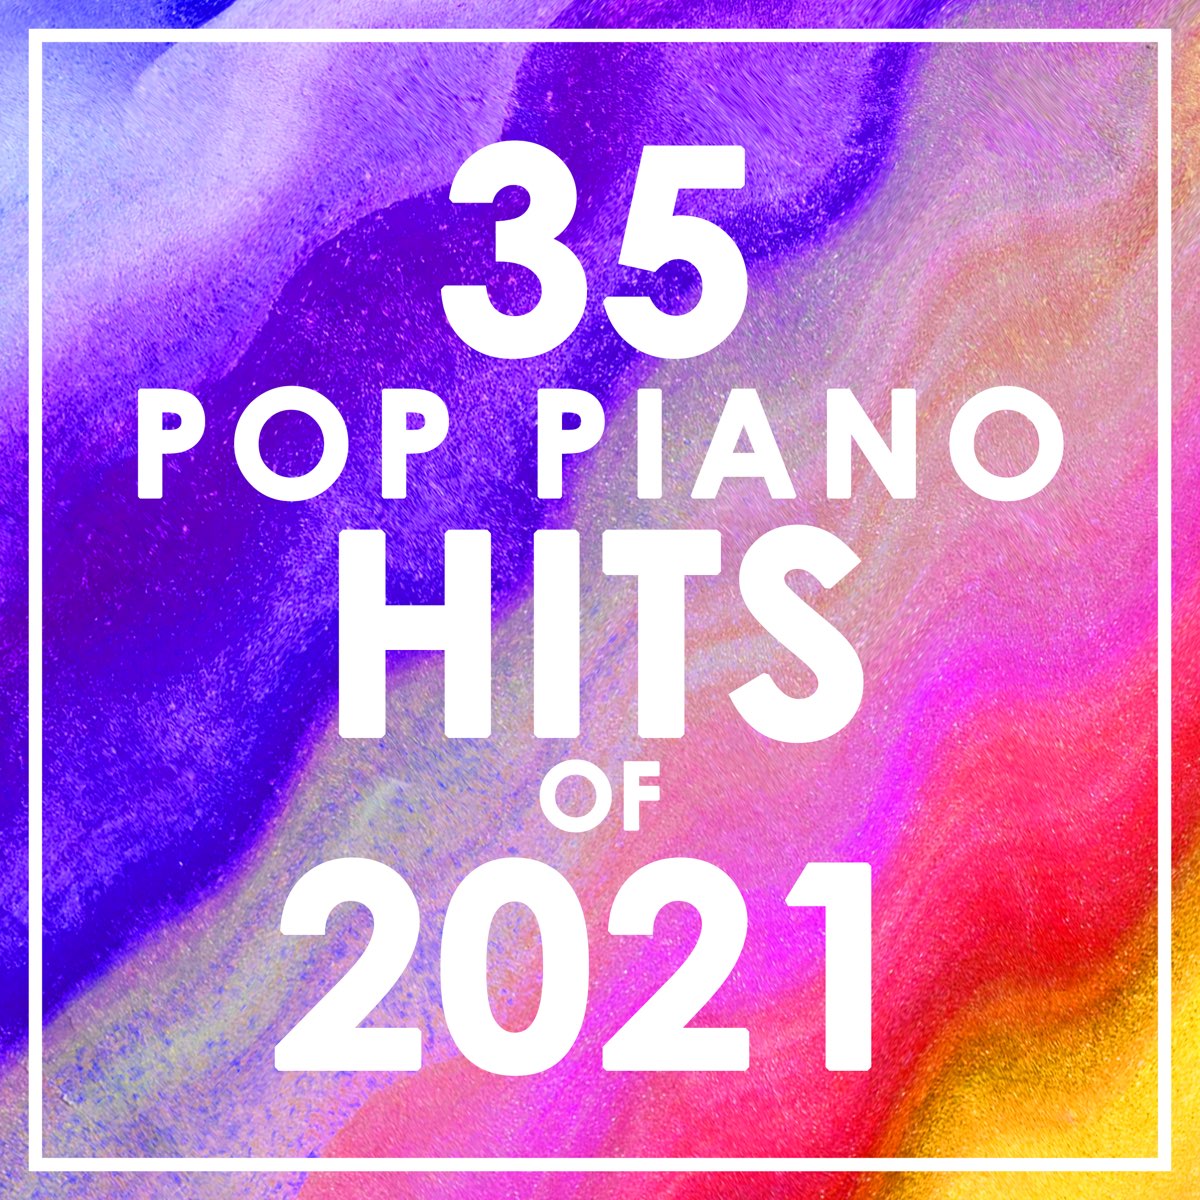 35 Pop Piano Hits of 2021 (Instrumental) by Piano Dreamers on Apple Music